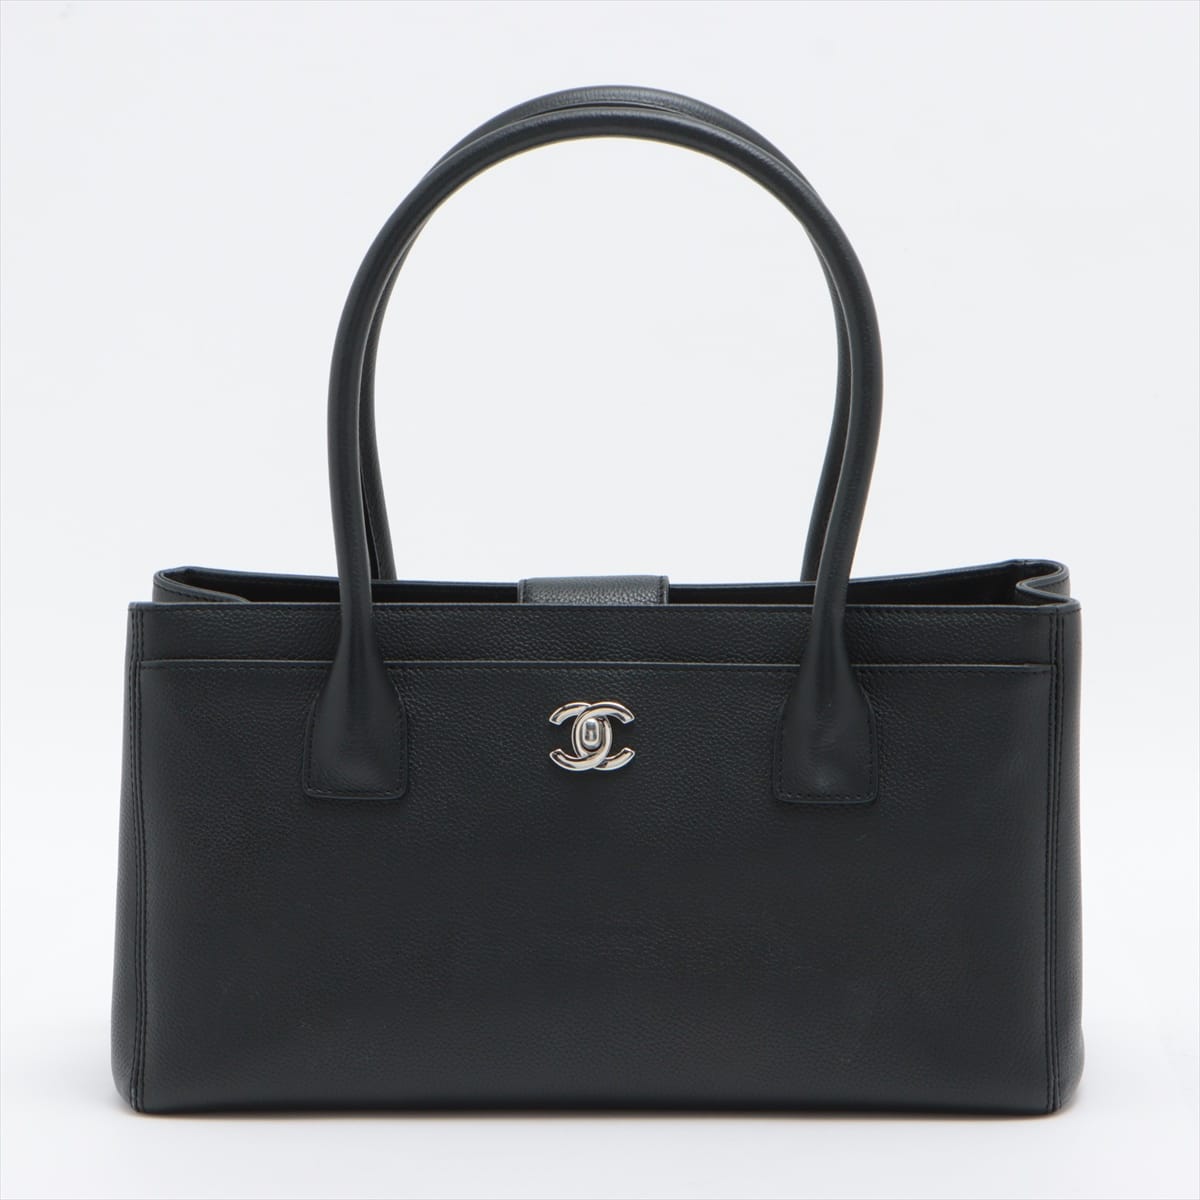 Chanel Executive Leather Tote bag Black Silver Metal fittings 18XXXXXX Comes with divider pouch